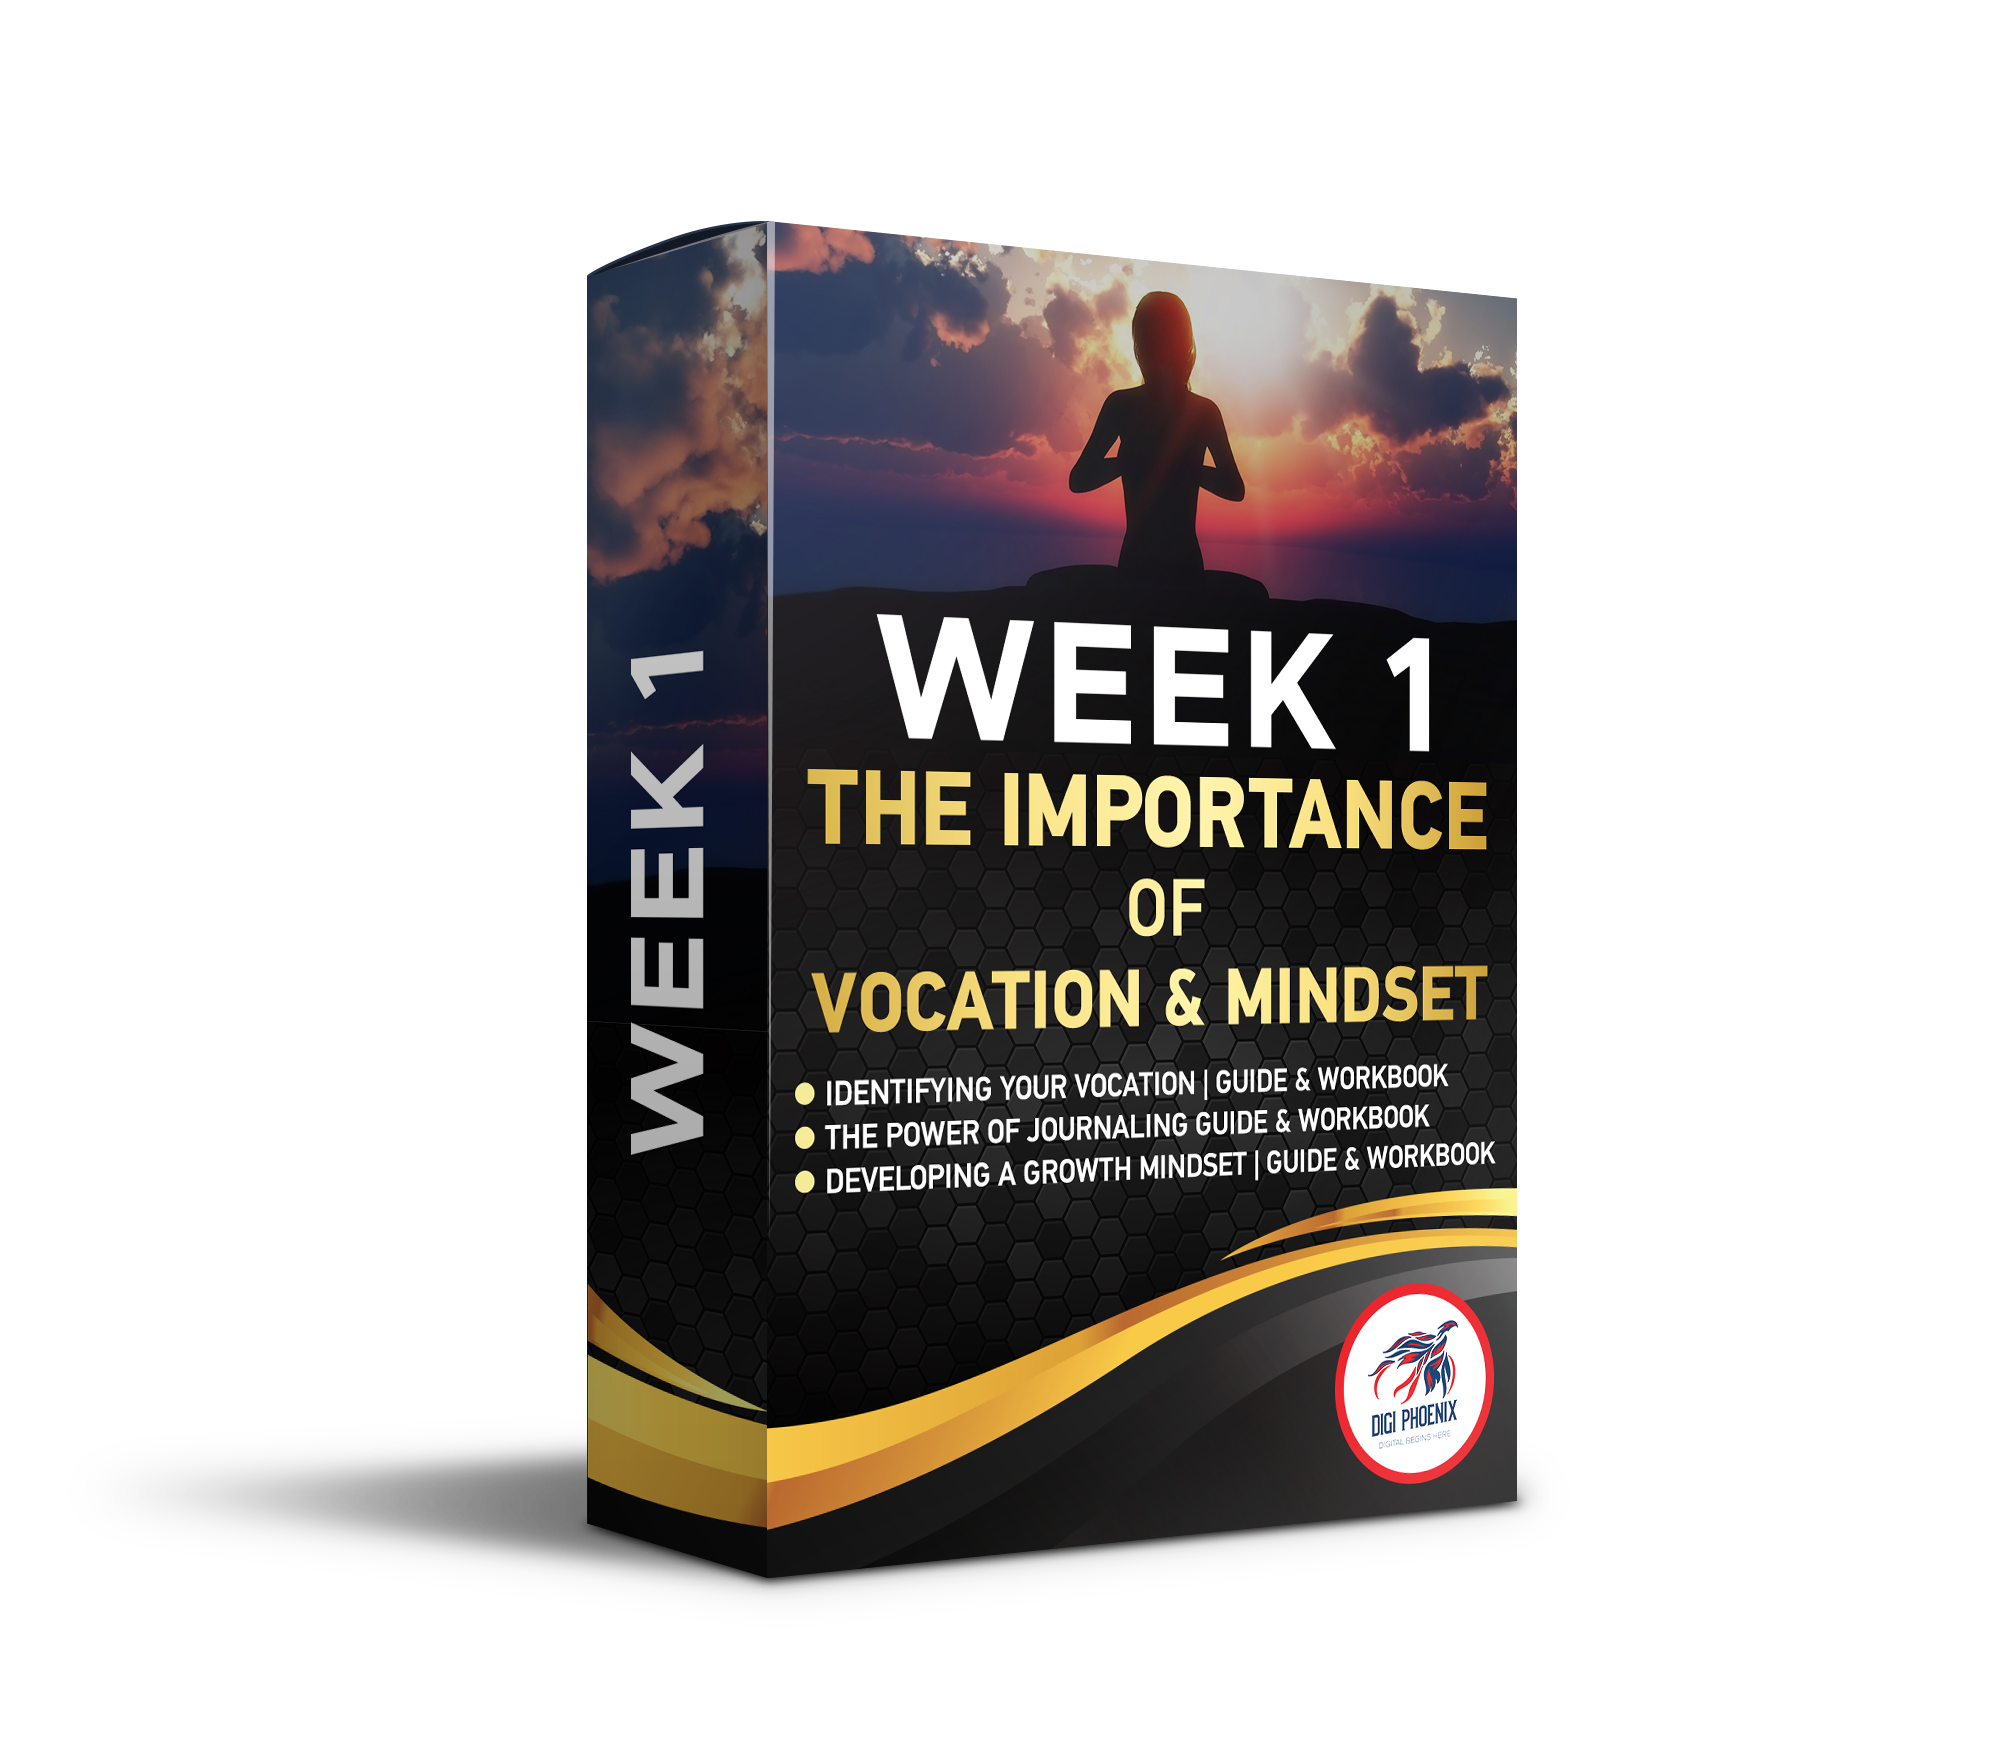 Week1 The Importance Of Vocation